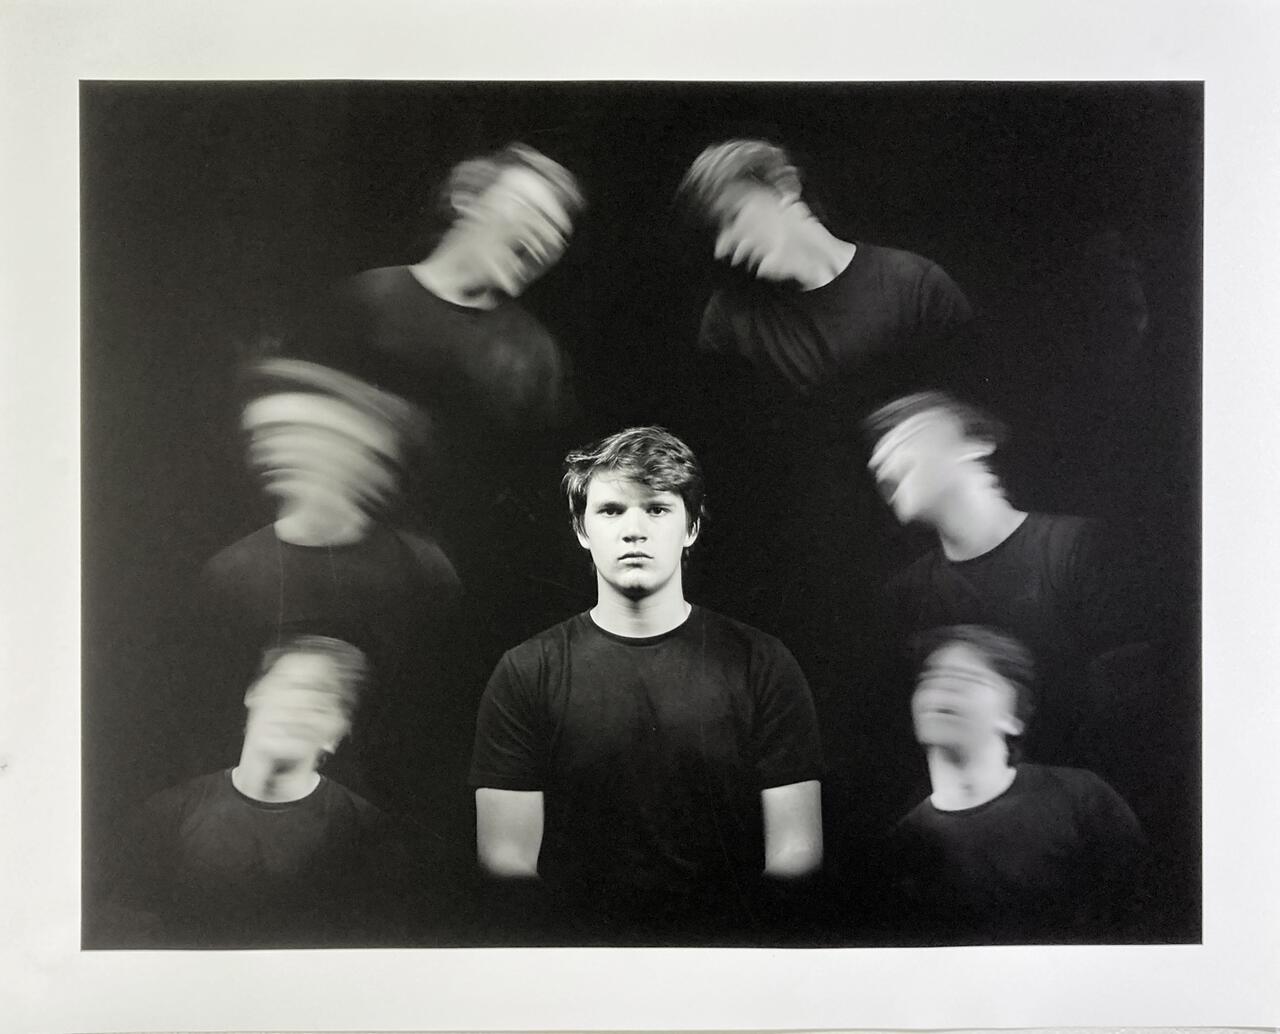 Black and white photograph featuring one student in several poses from the torso up. Central is the student looking directly into the camera. On each side of the central figure are three images of the student with a blurred head showing different movement and facial expressions.